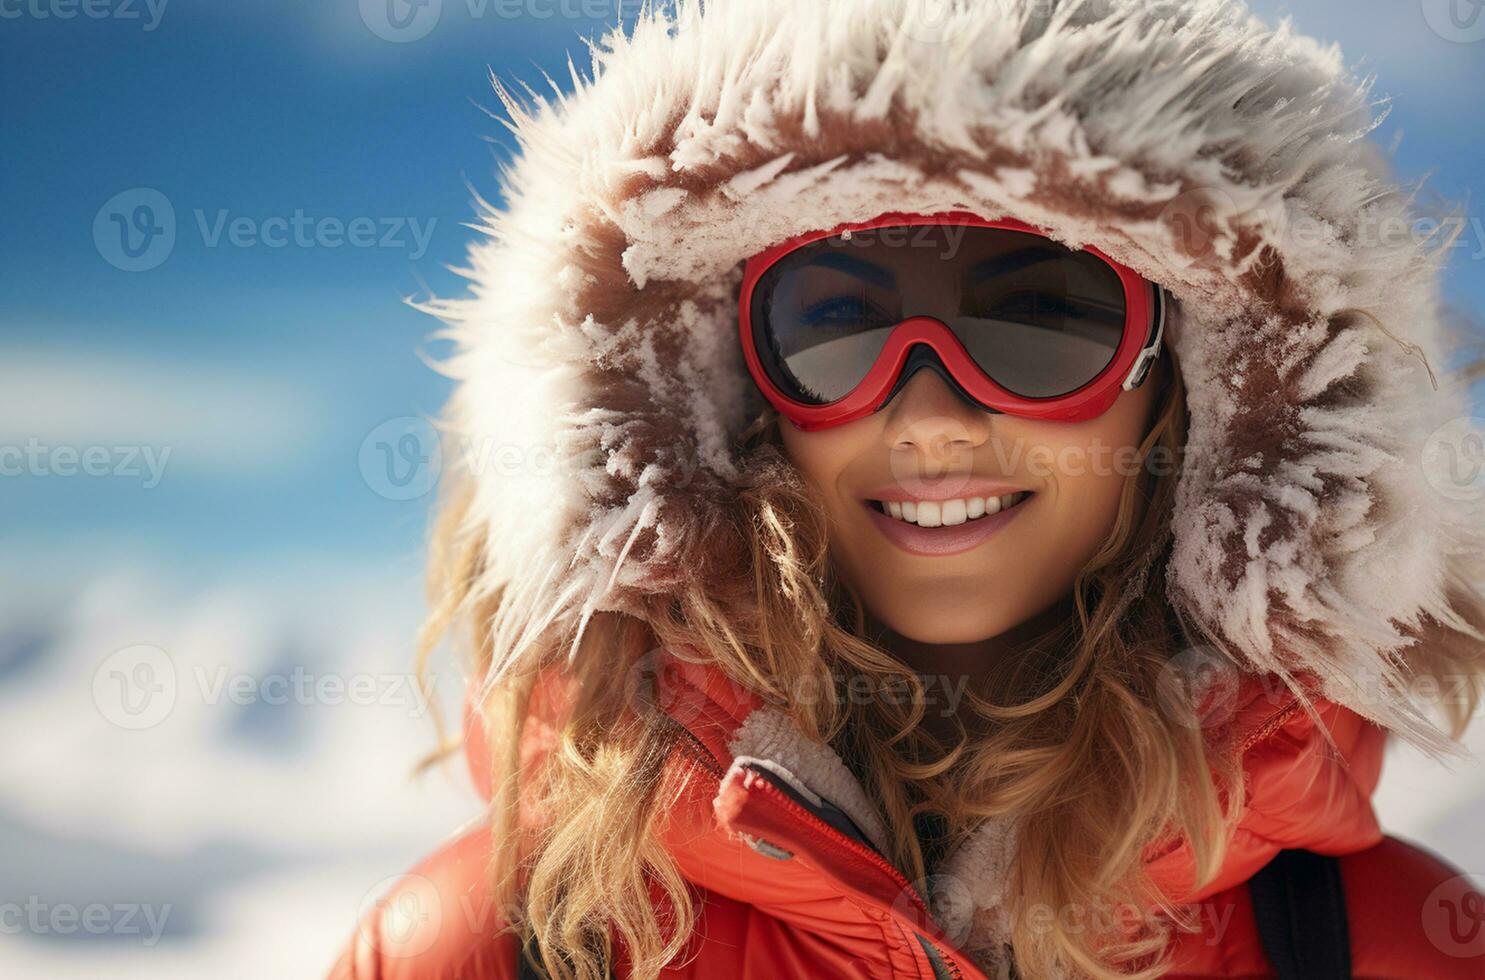 https://static.vecteezy.com/system/resources/previews/030/583/850/non_2x/close-up-portrait-of-a-beautiful-girl-in-a-ski-suit-and-goggles-ai-generated-photo.jpg